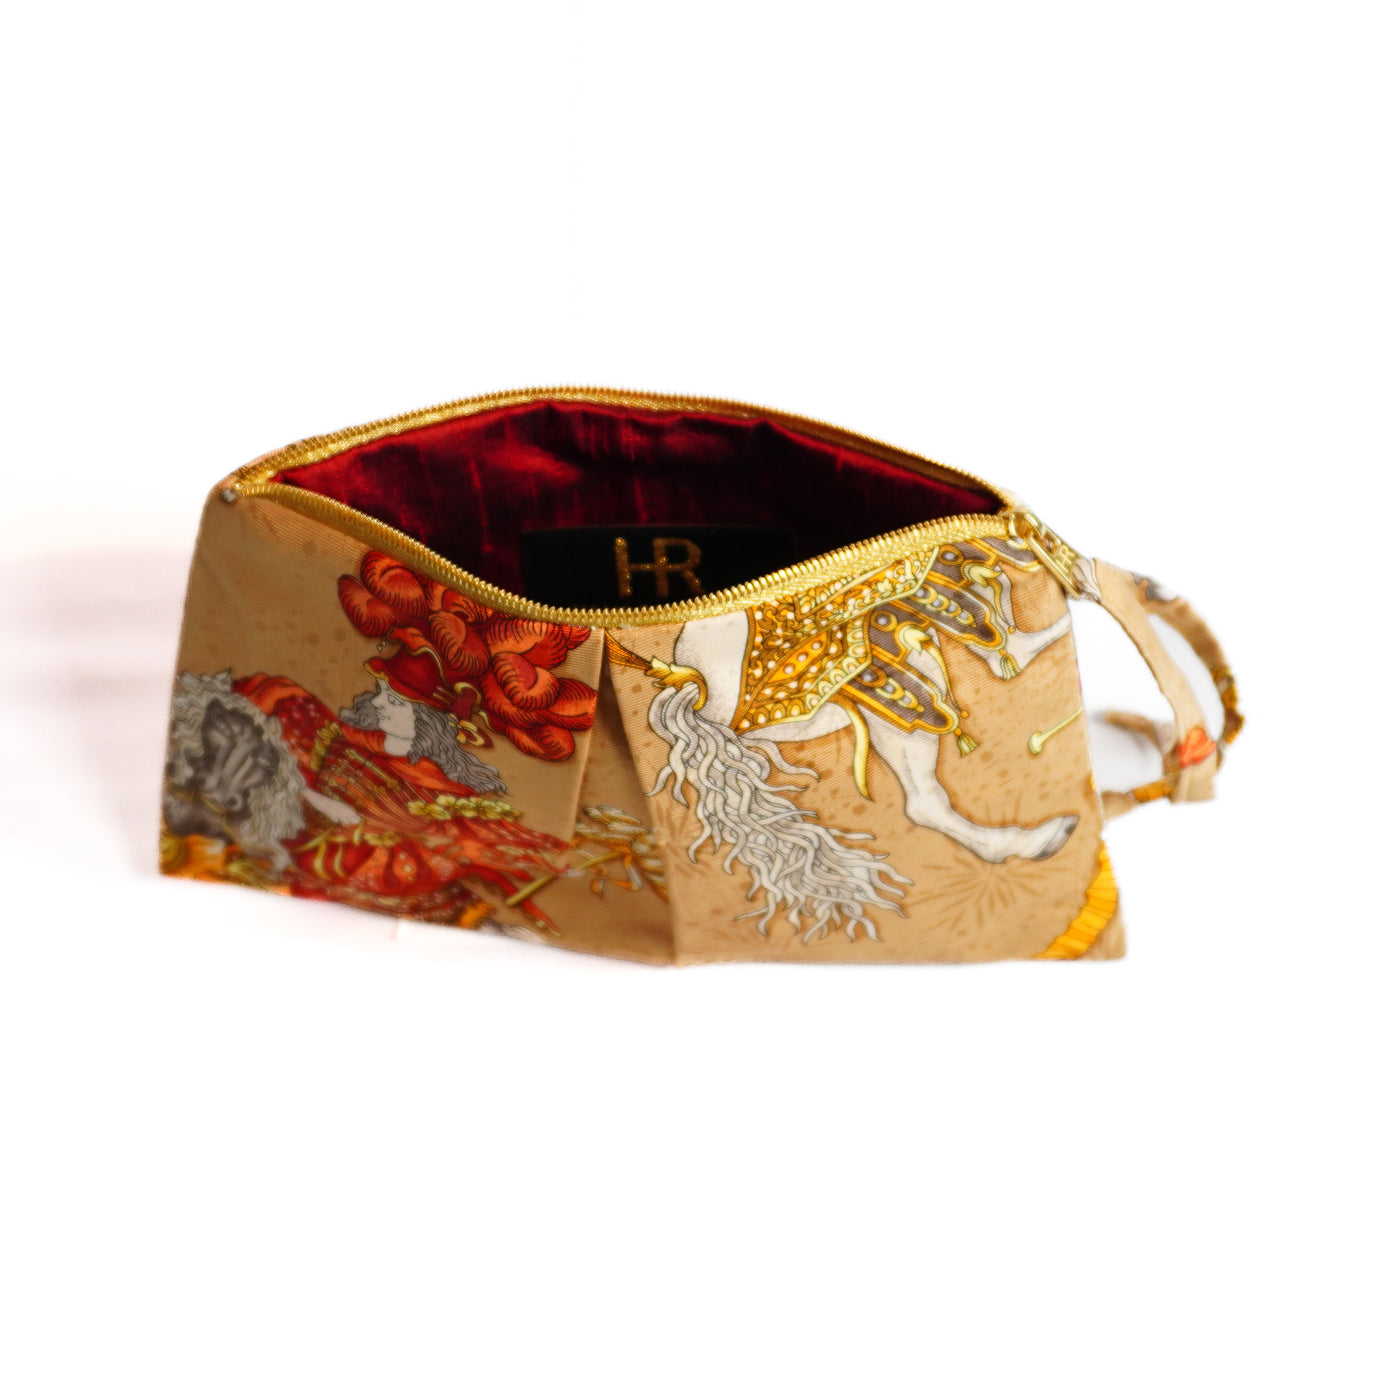 "Les Fetes de Roi Soleil" Scarf Bag (Upcycled from Hermes Scarf) Party Clutch Hampton Road Designs   